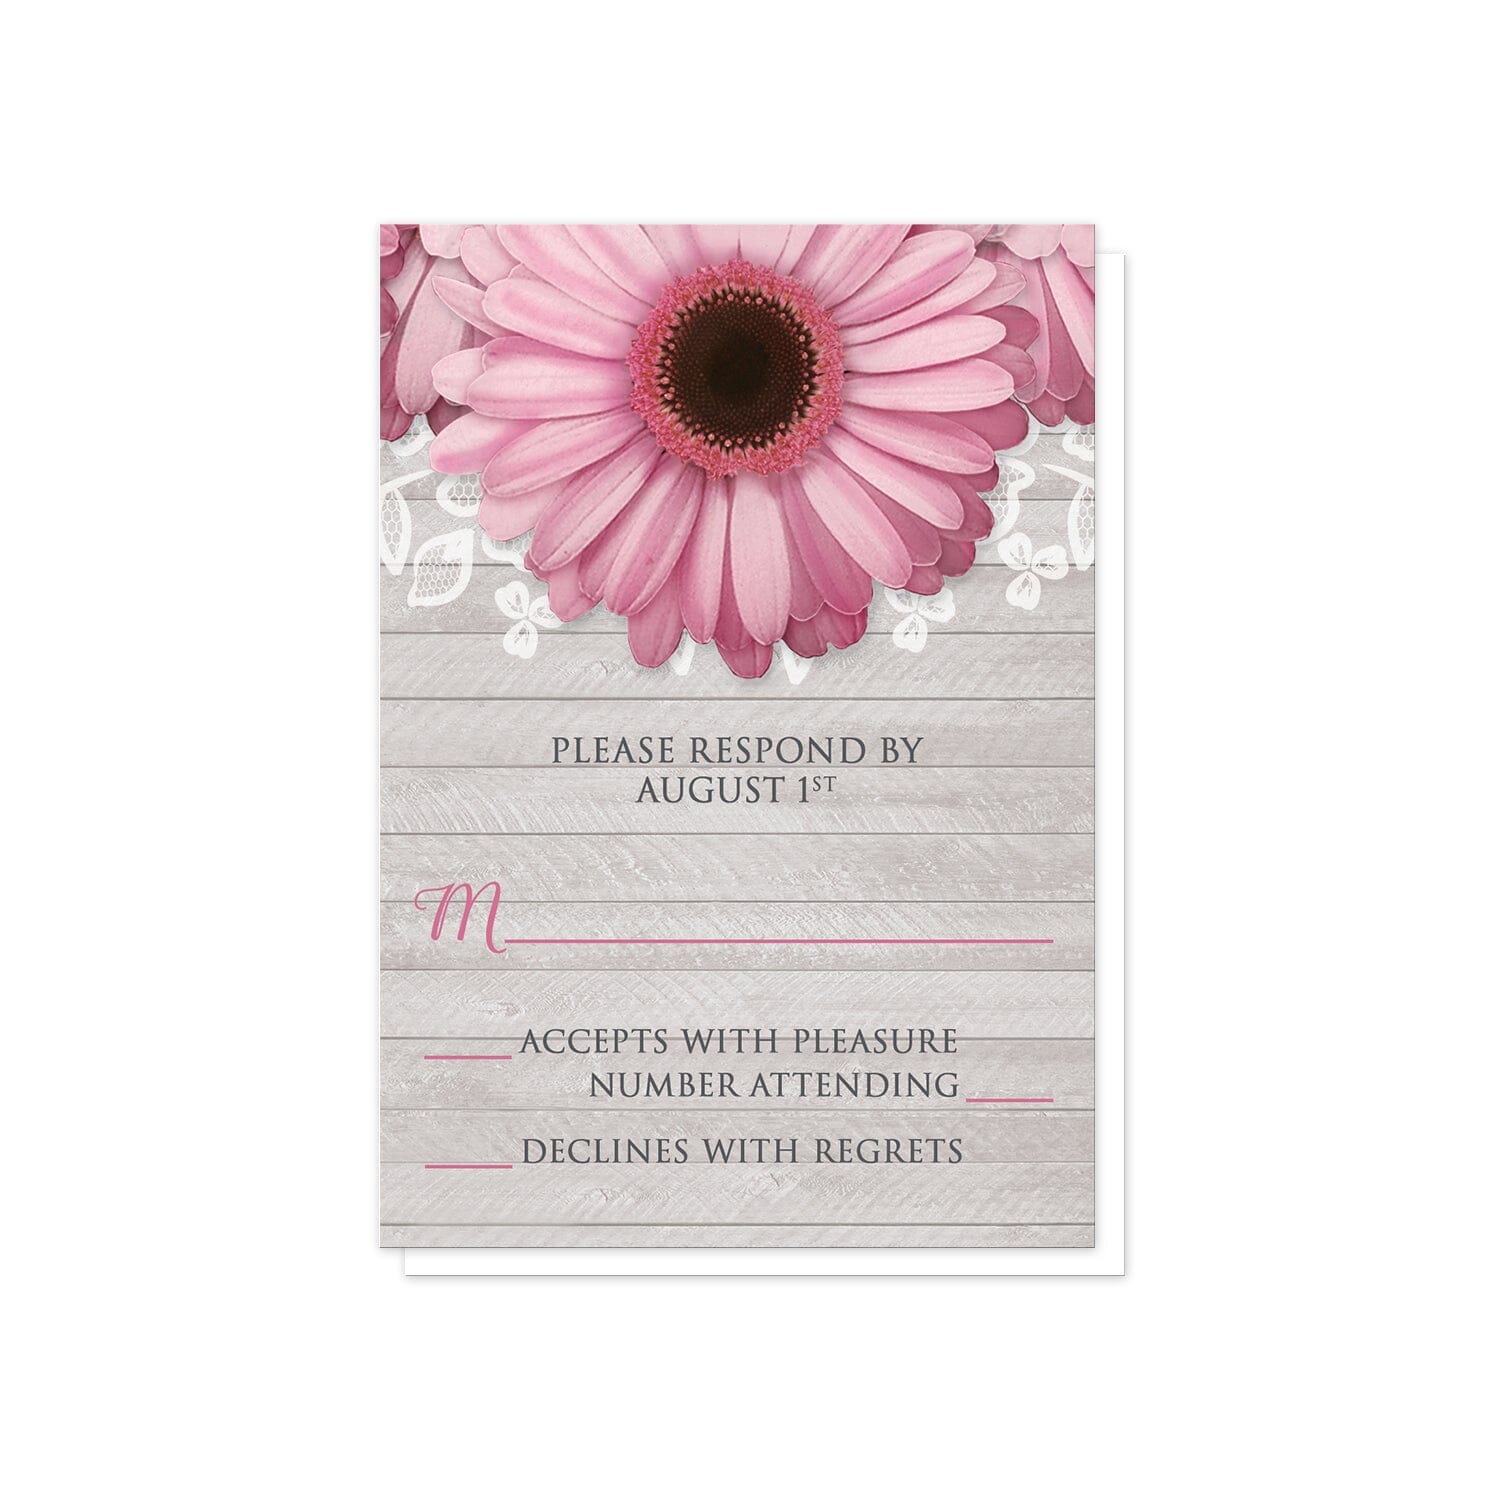 Rustic Pink Daisy Gray Wood RSVP Cards at Artistically Invited.